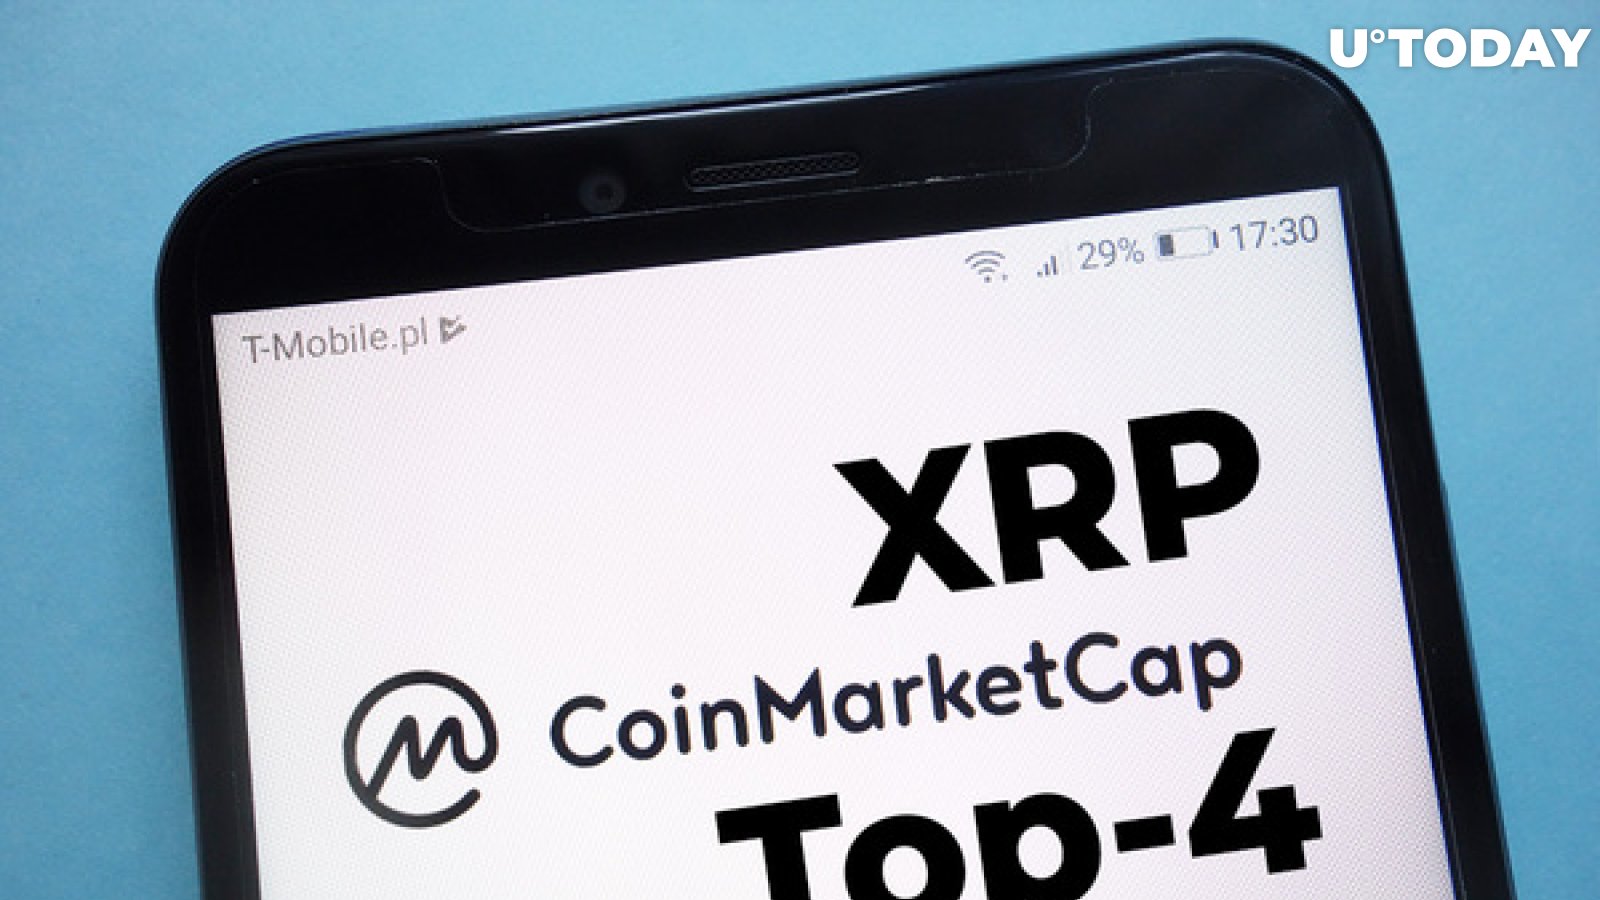 XRP Recaptures Top-4 Spot on CoinMarketCap, Inching Real Close to $1